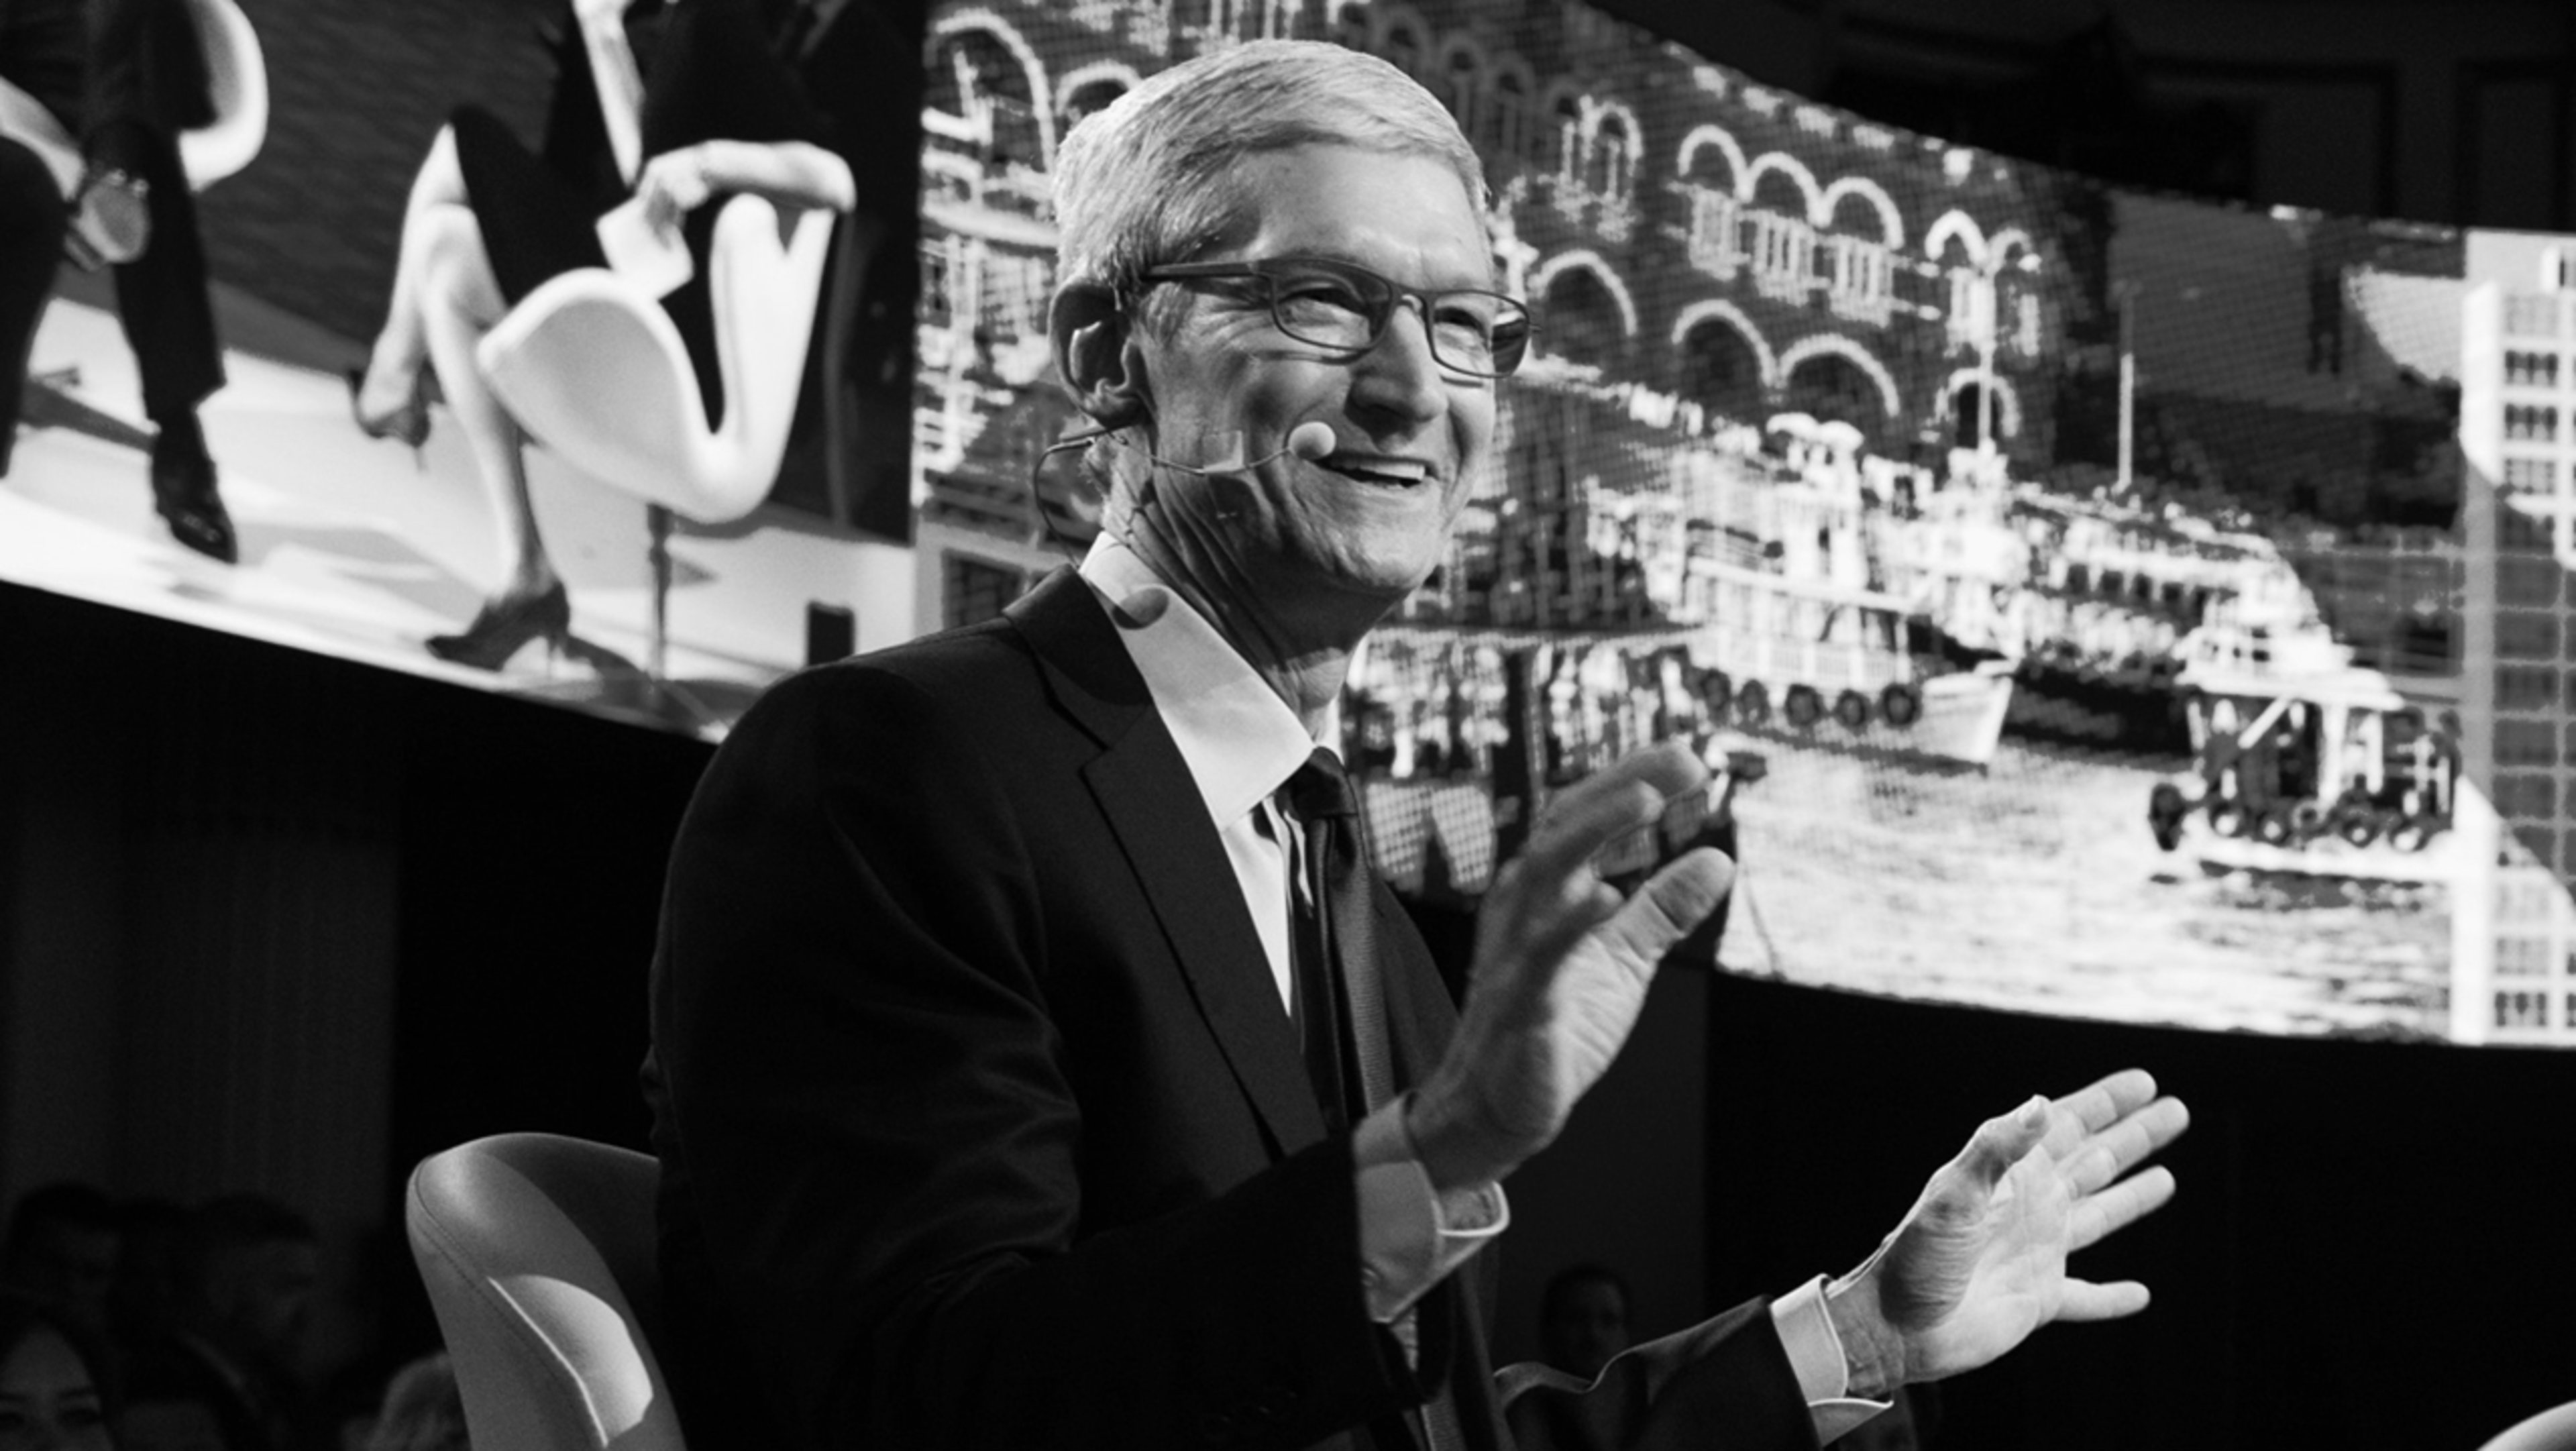 Apple’s Tim Cook says sports are a “great unifier” on ESPN